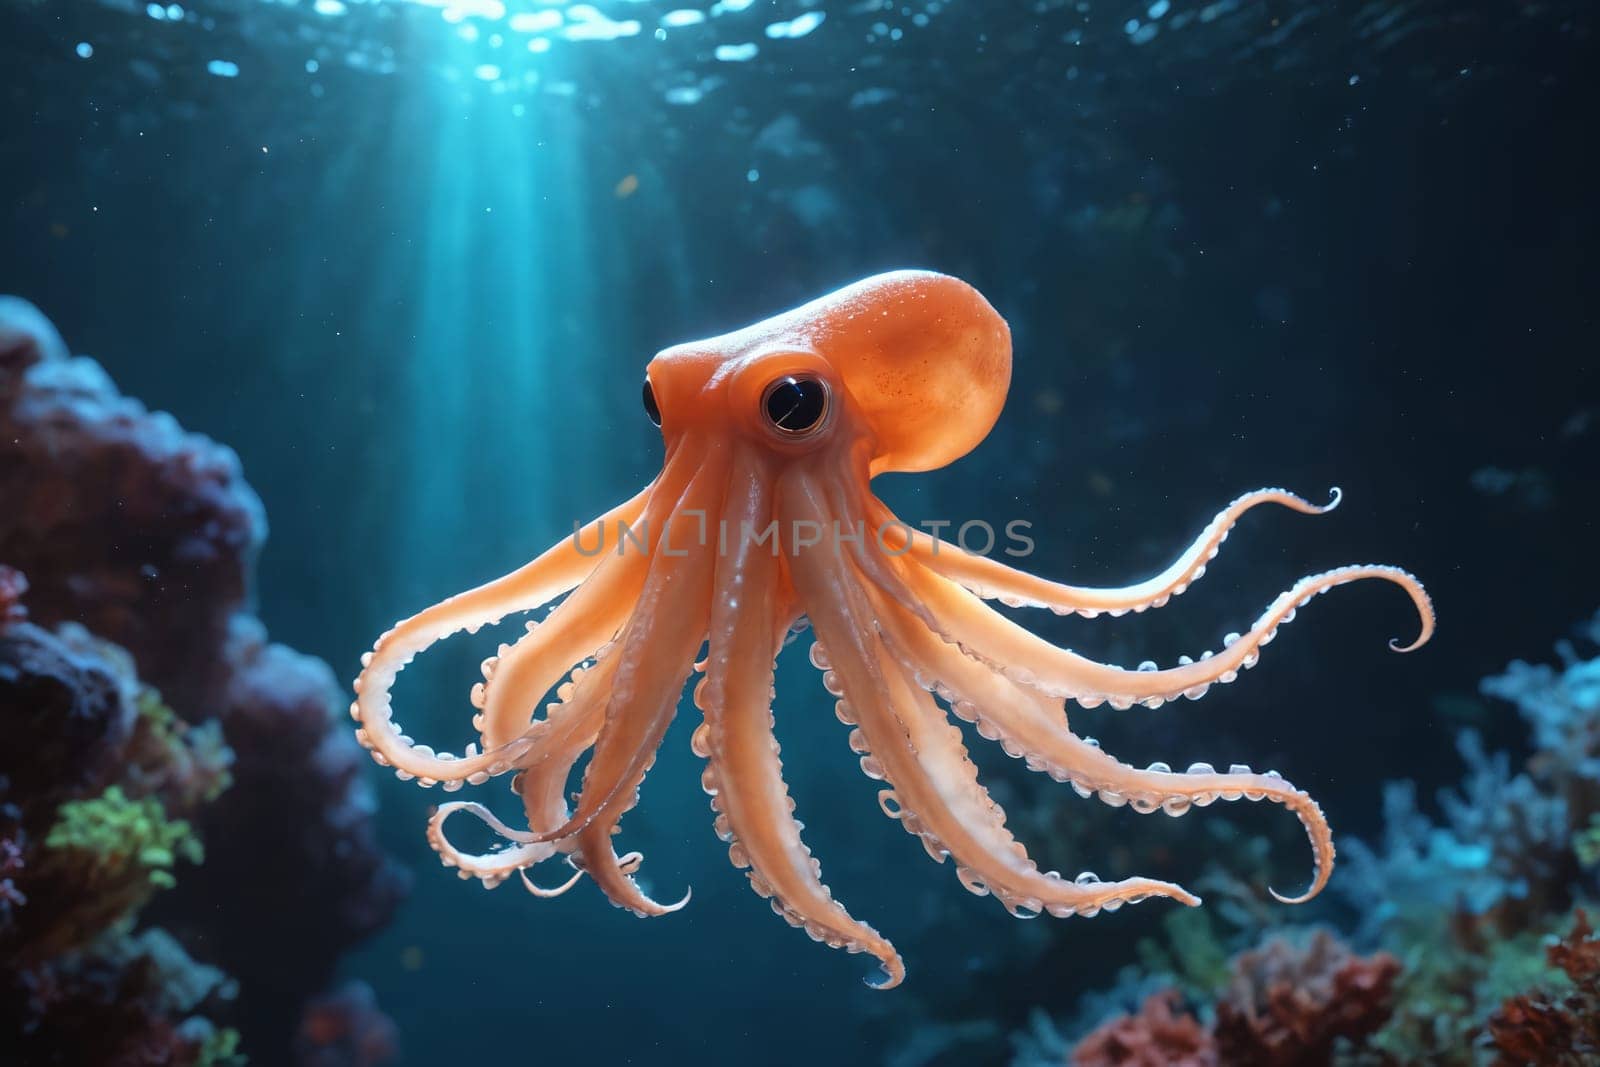 An octopus exhibits its intelligence and grace underwater, with a focus on its complex eyes and dynamic arms.